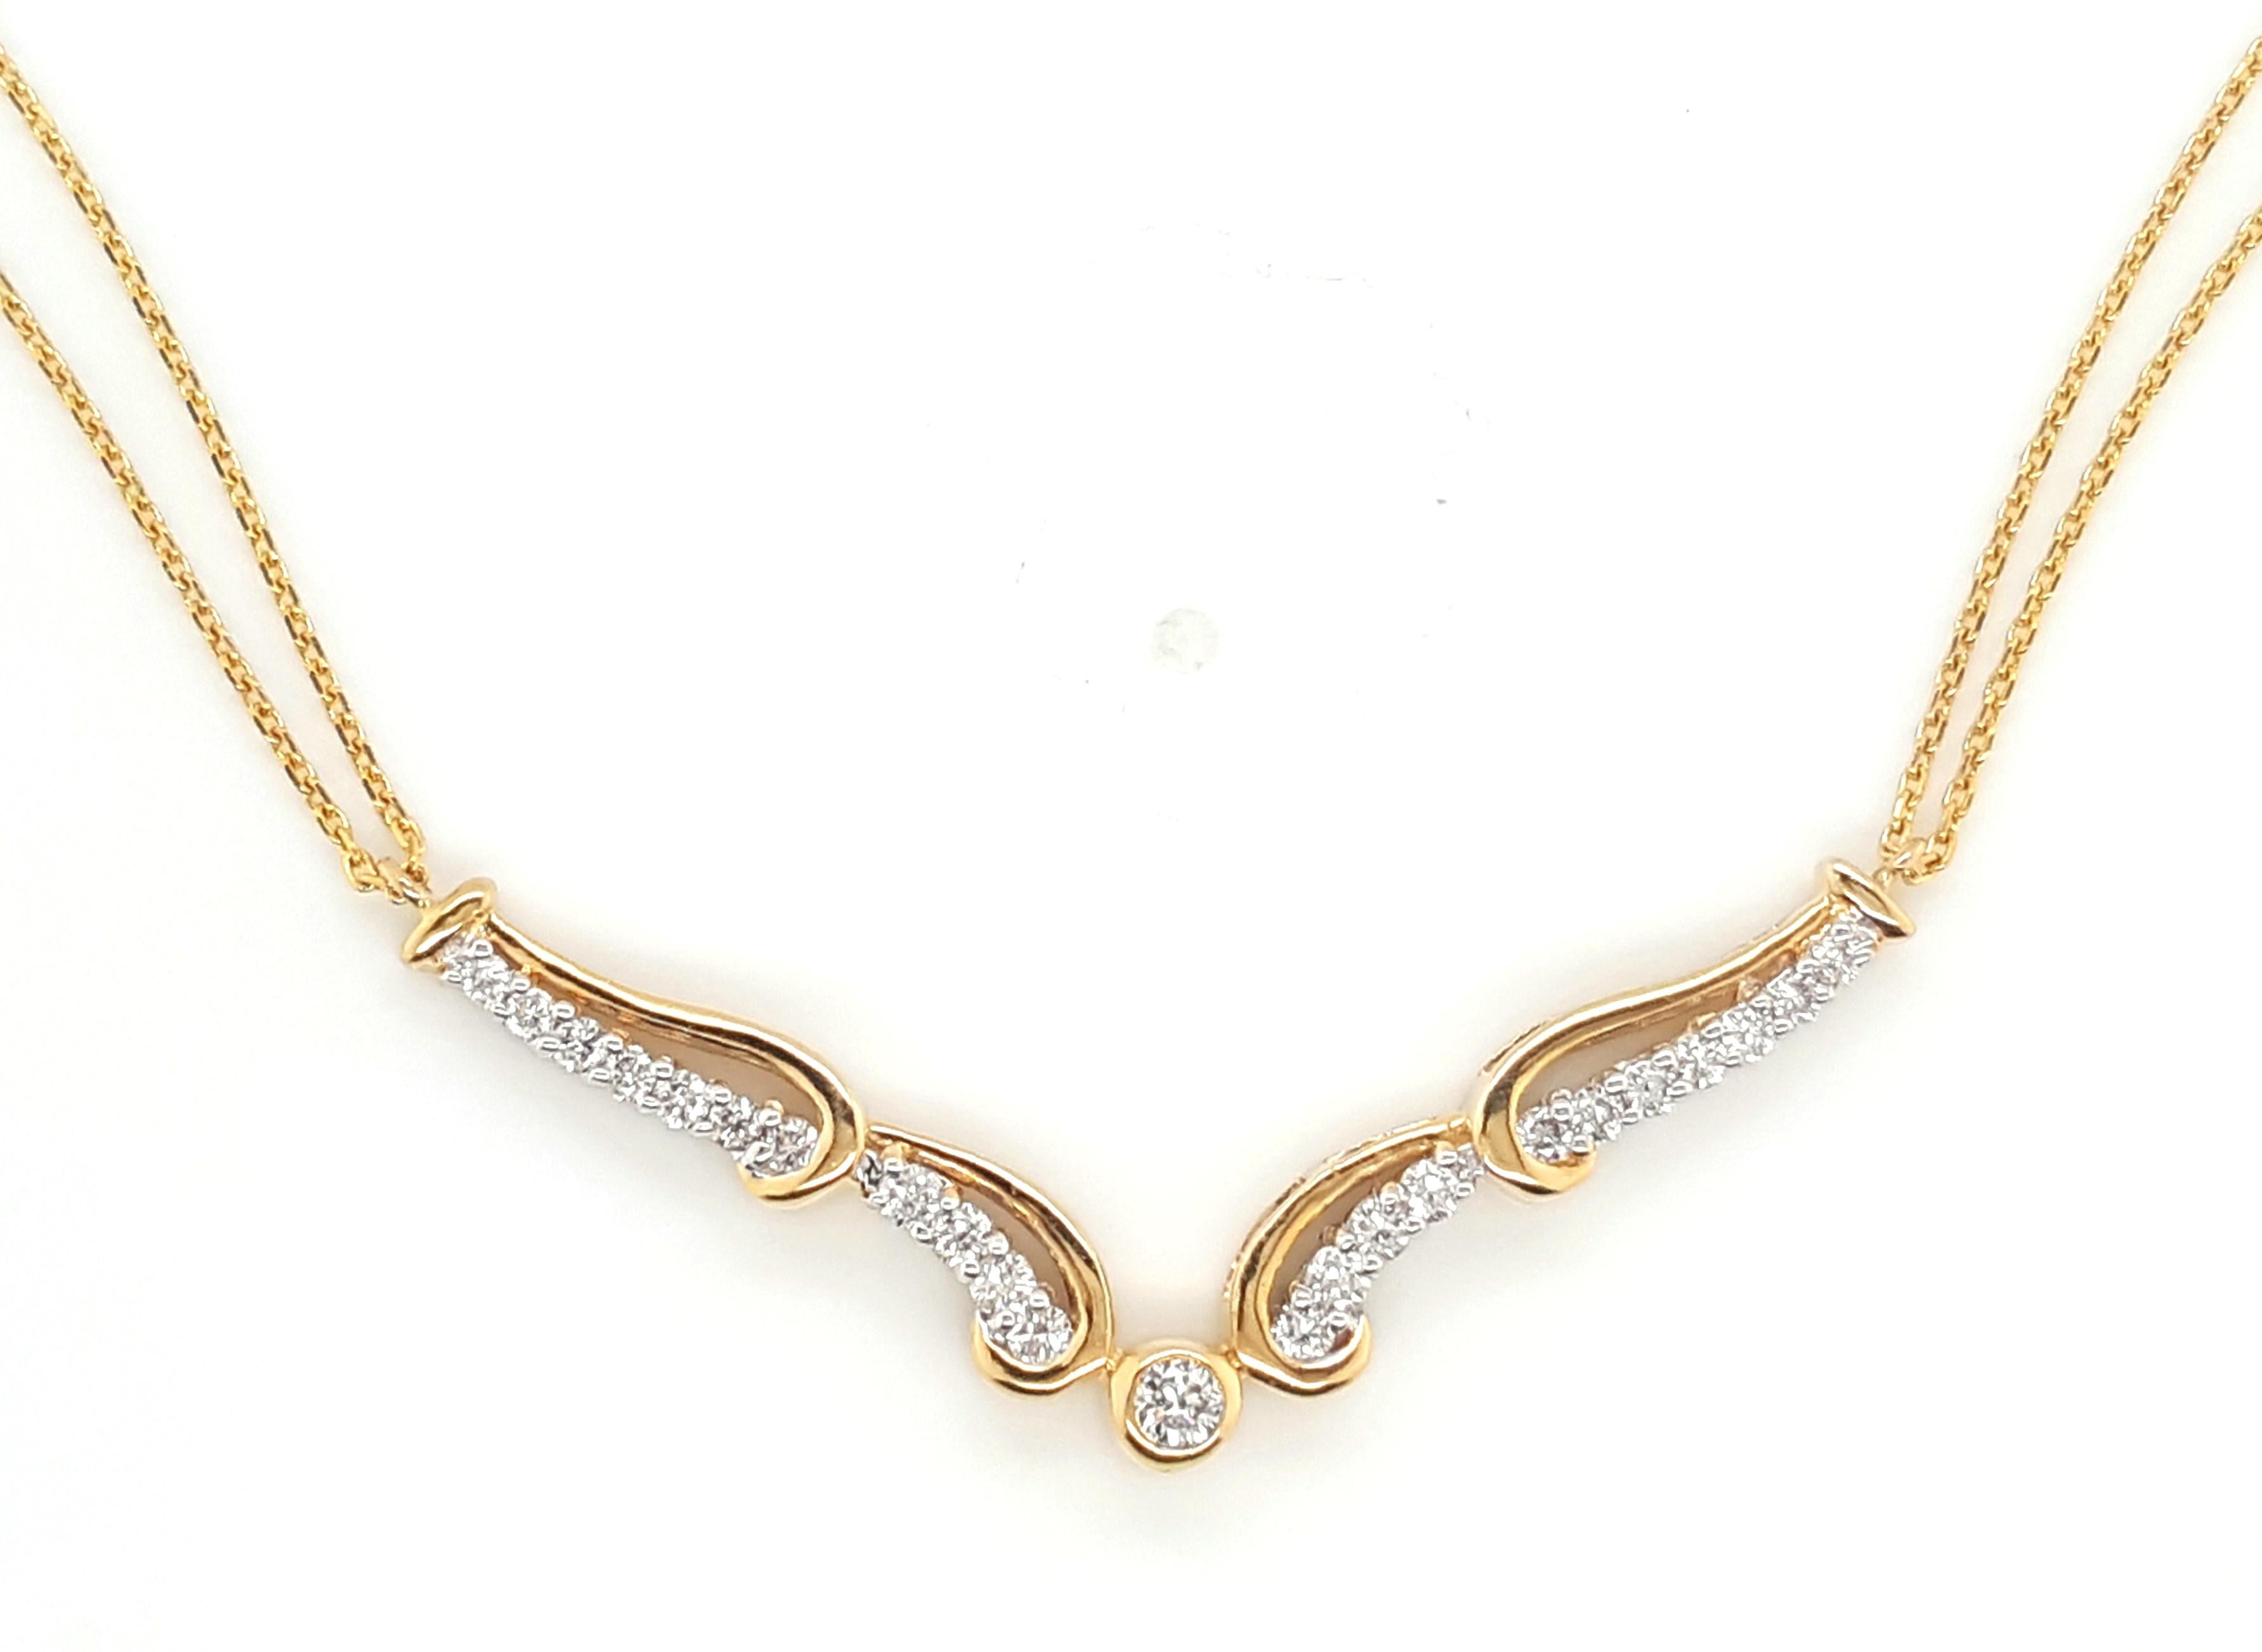 18 Karat Yellow Gold Diamond Necklace with Double Chain In Good Condition For Sale In Addison, TX